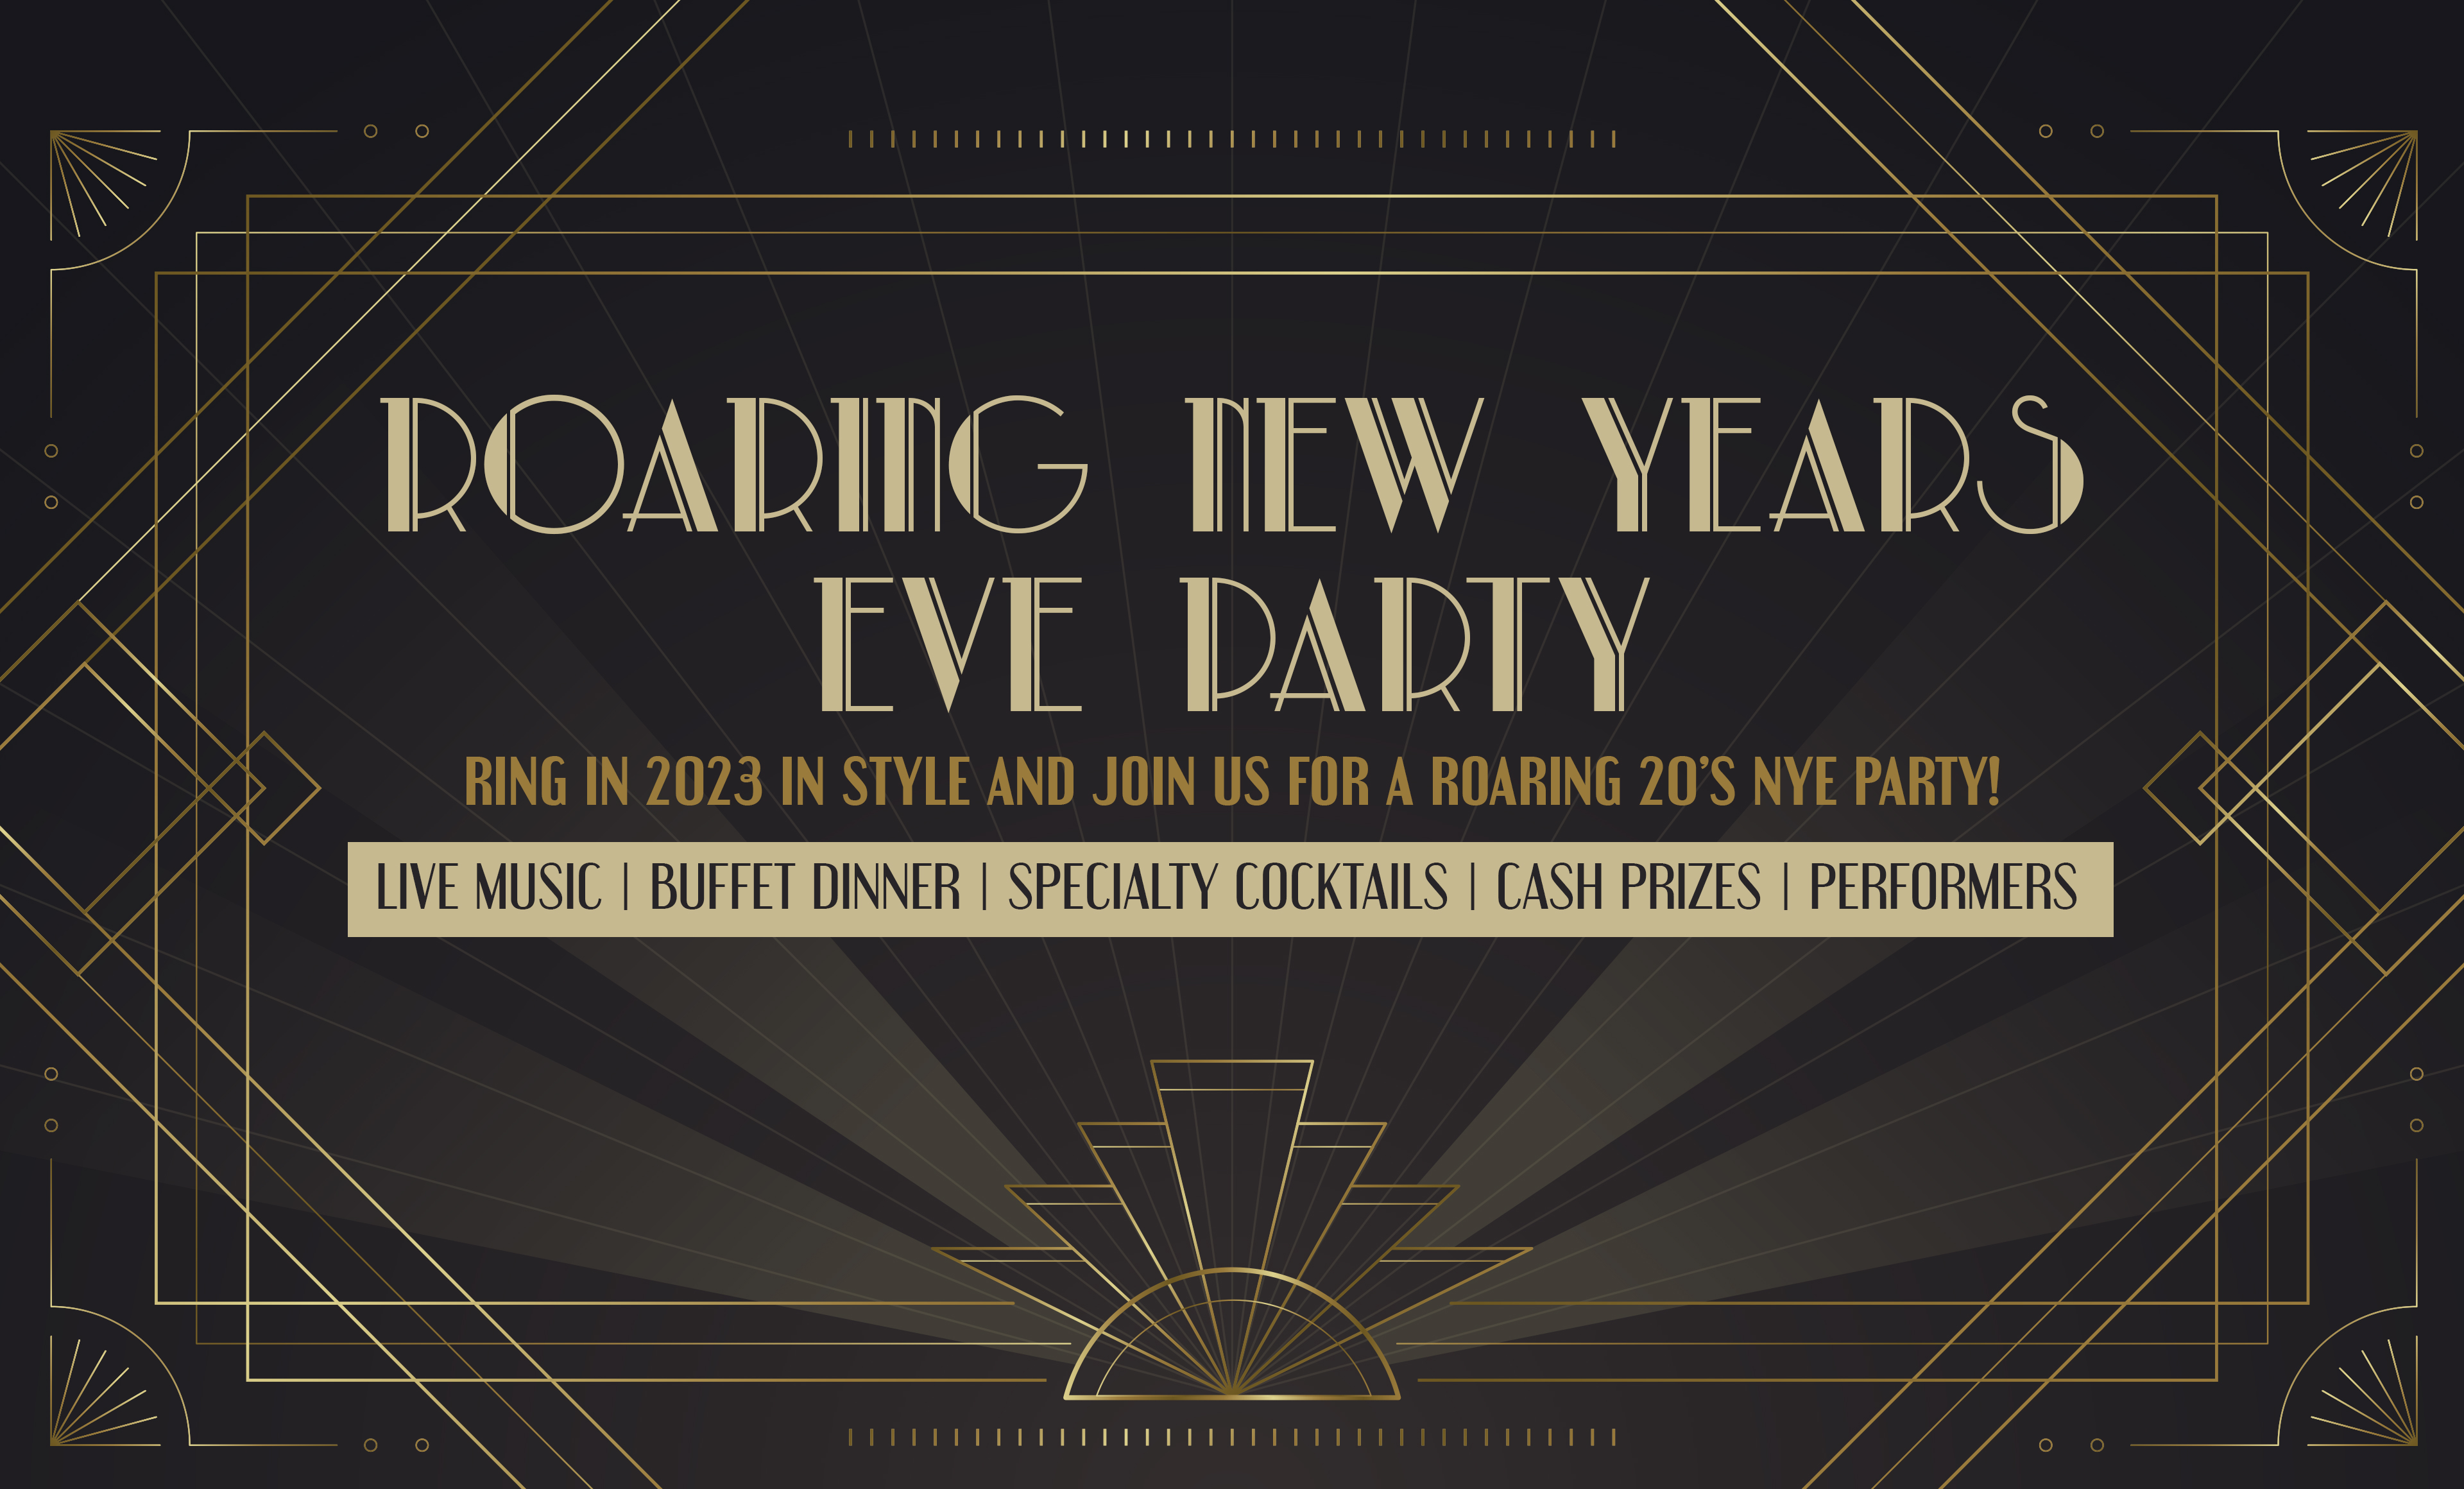 ROARING NEW YEARS EVE PARTY